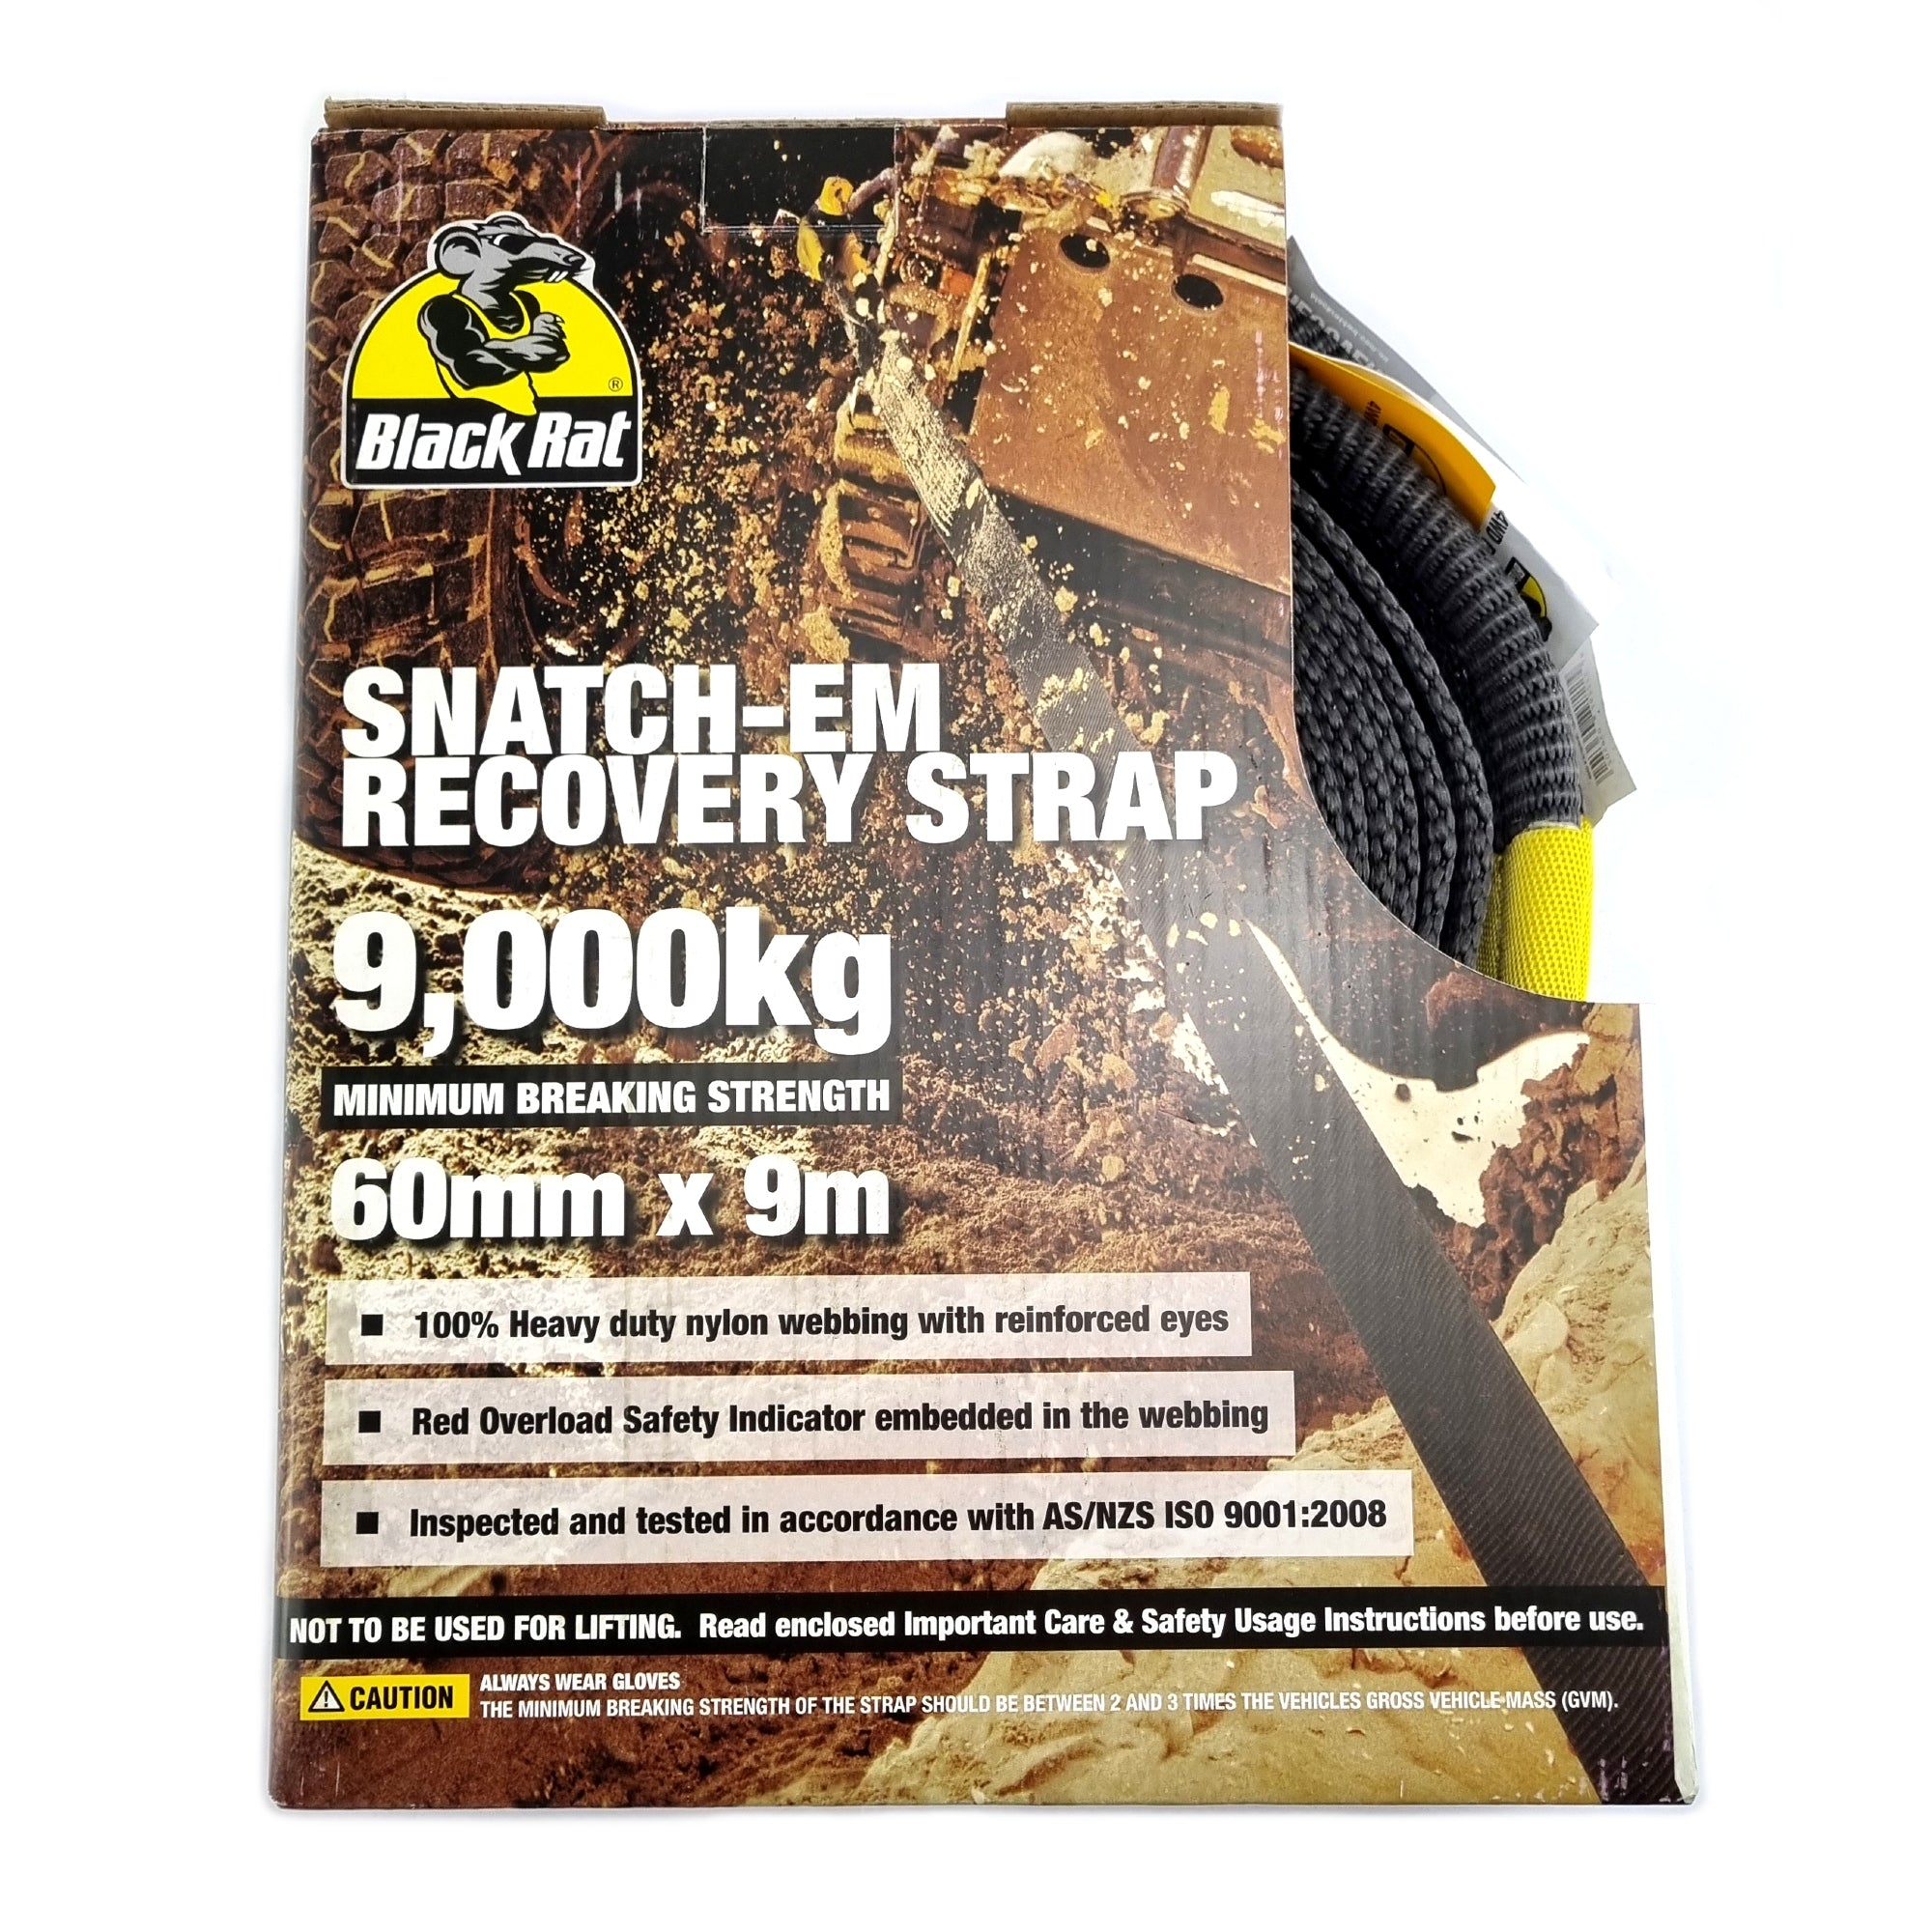 Snatch-em recovery strap with a minimum breaking strength of 9,000kg. This recovery strap (or snatch strap) is 9 metres long and made of 100% heavy-duty nylon webbing with reinforced eyes. Red Overload Safety Indicator embedded in the webbing. Test certificate provided. Shop 4WD Accessories online chain.com.au